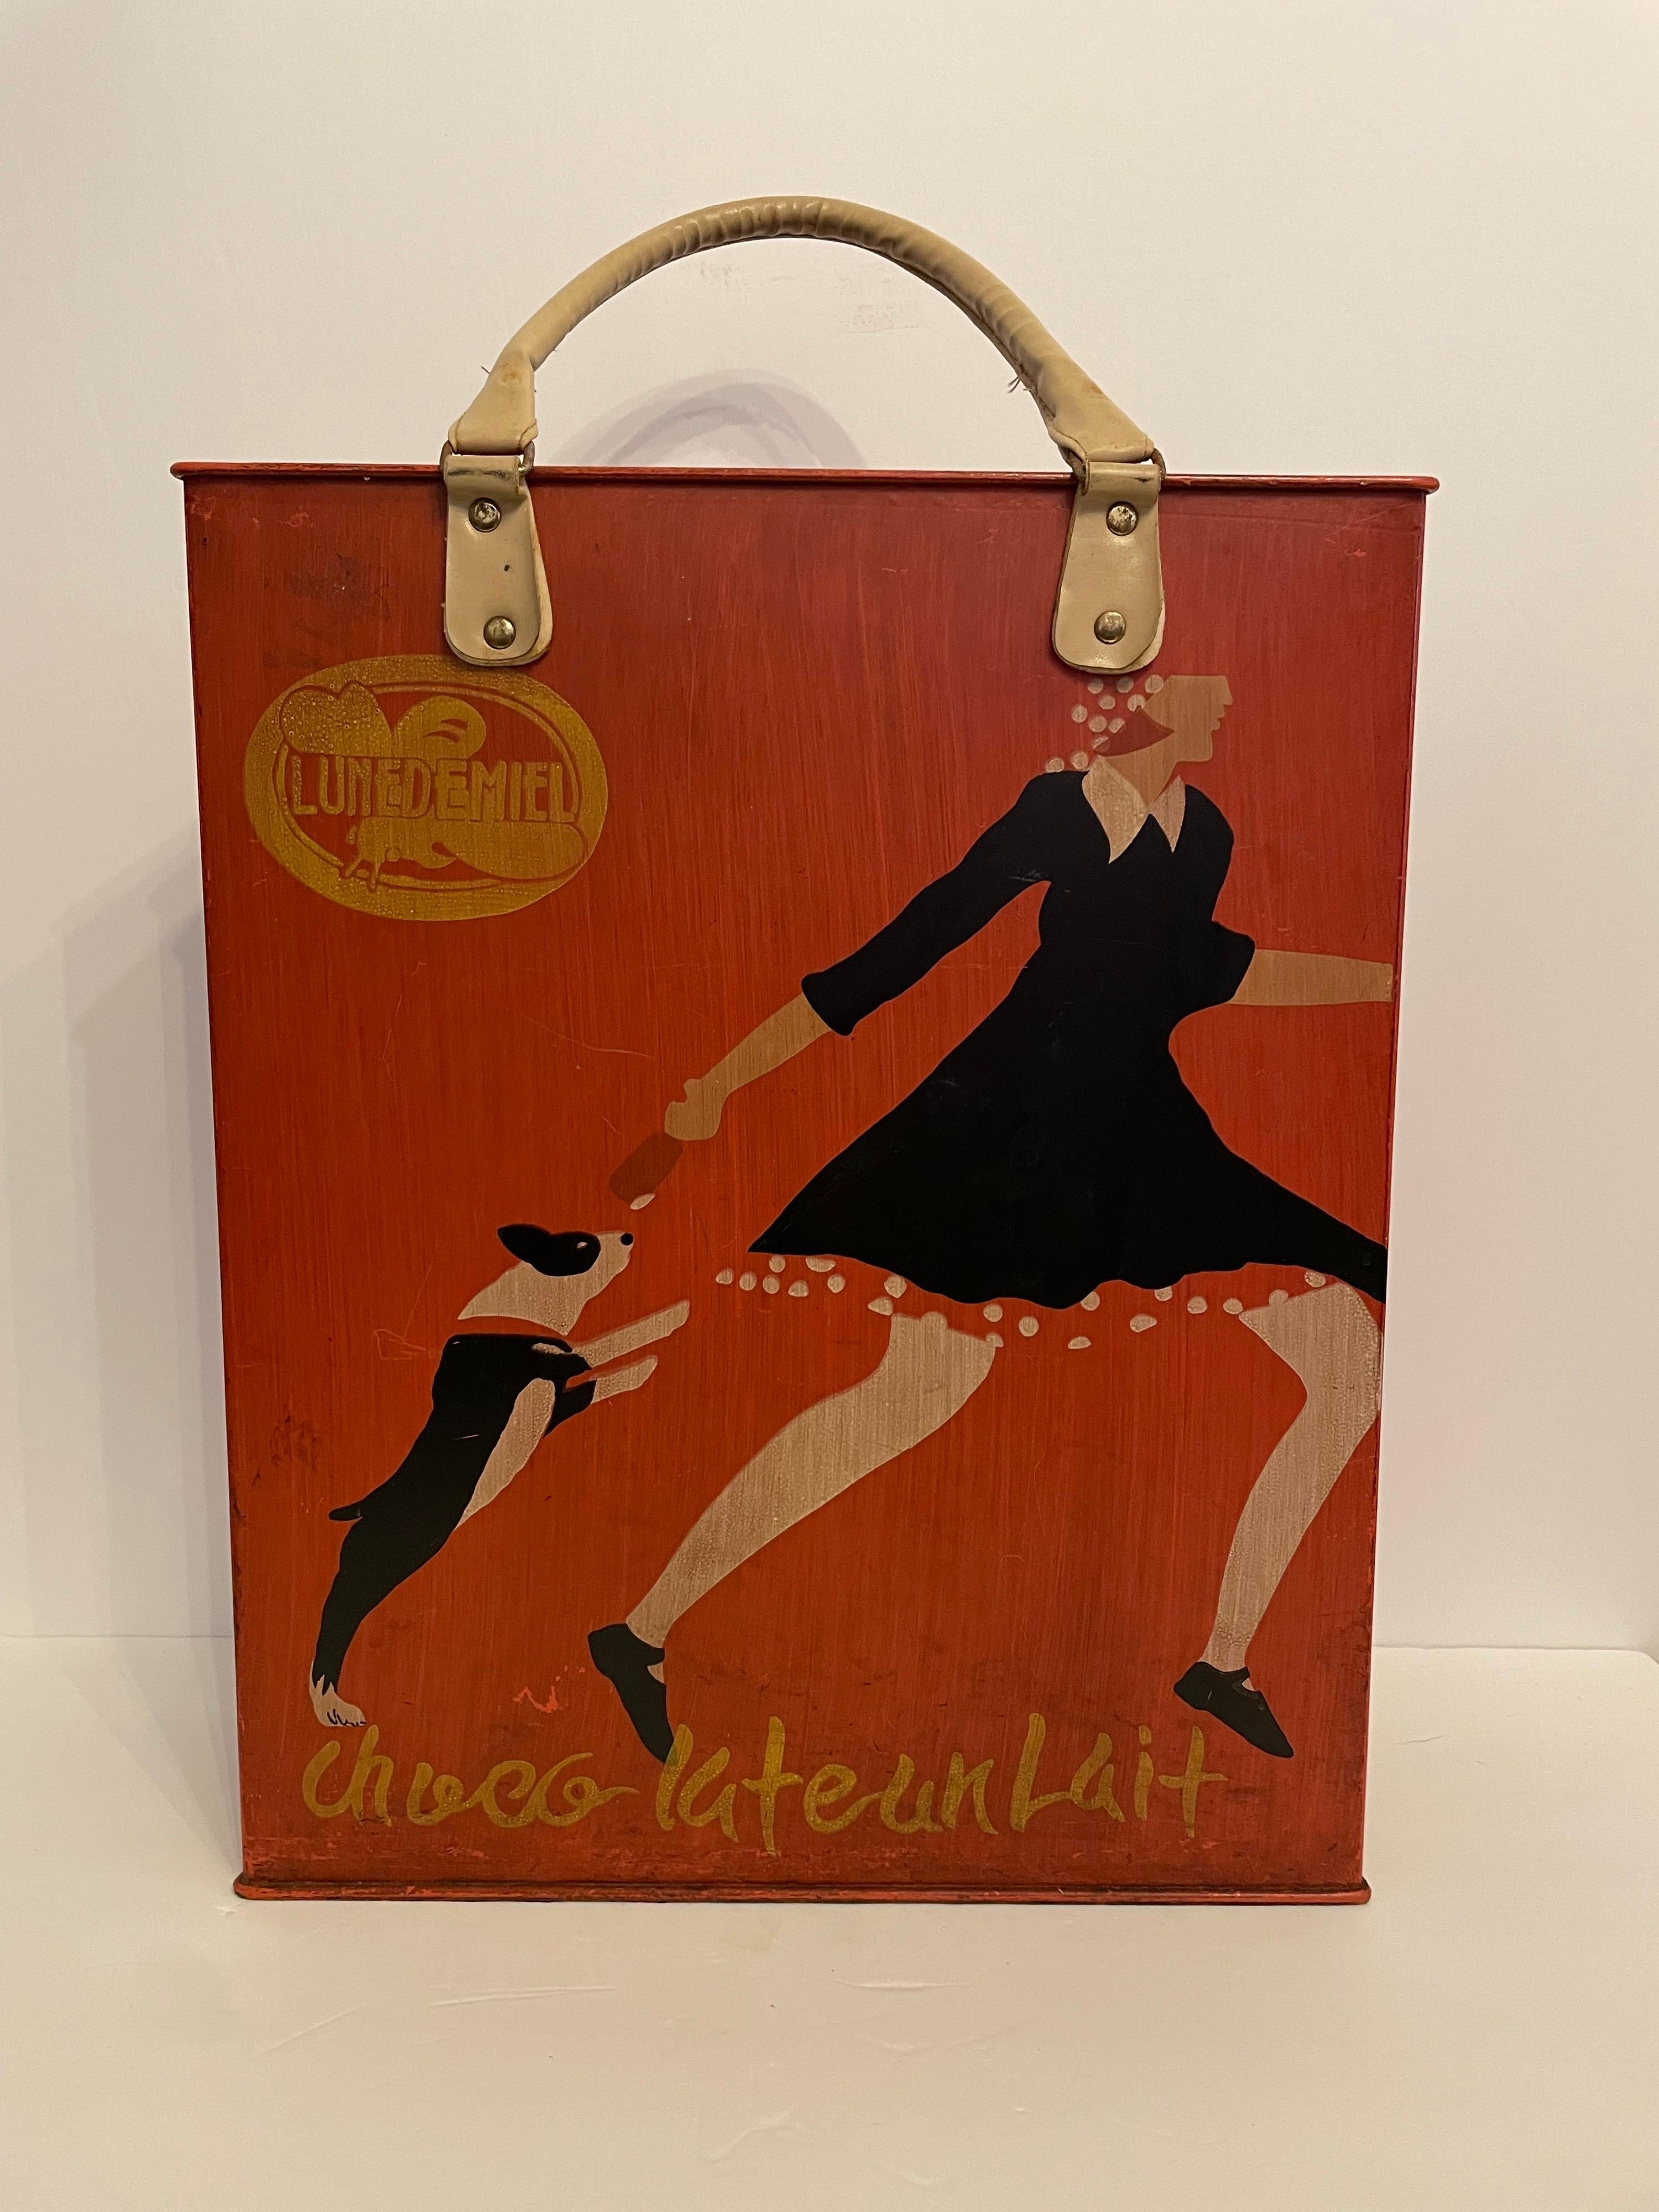 Art Deco style Umbrella stand in the form of a shopping bag. In gold neat handle is Lunedemiel (Honey Moon) and near bottom is Chocolate au Lait Painted on both sides. Measures 14